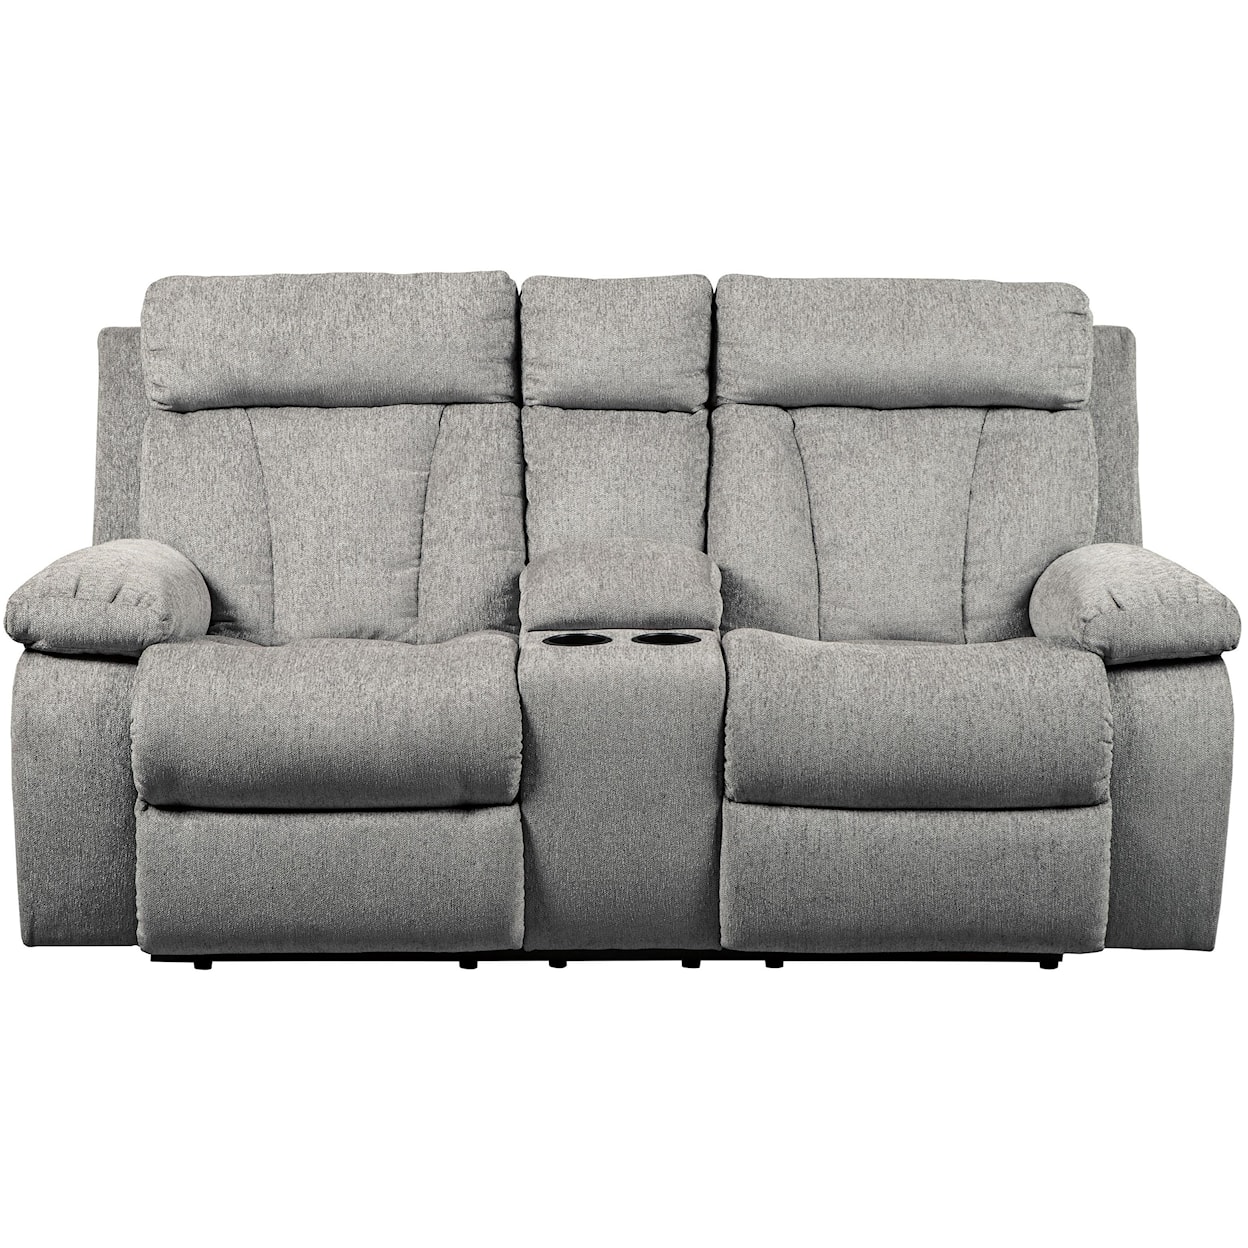 Signature Design by Ashley Mitchiner Double Reclining Love Seat